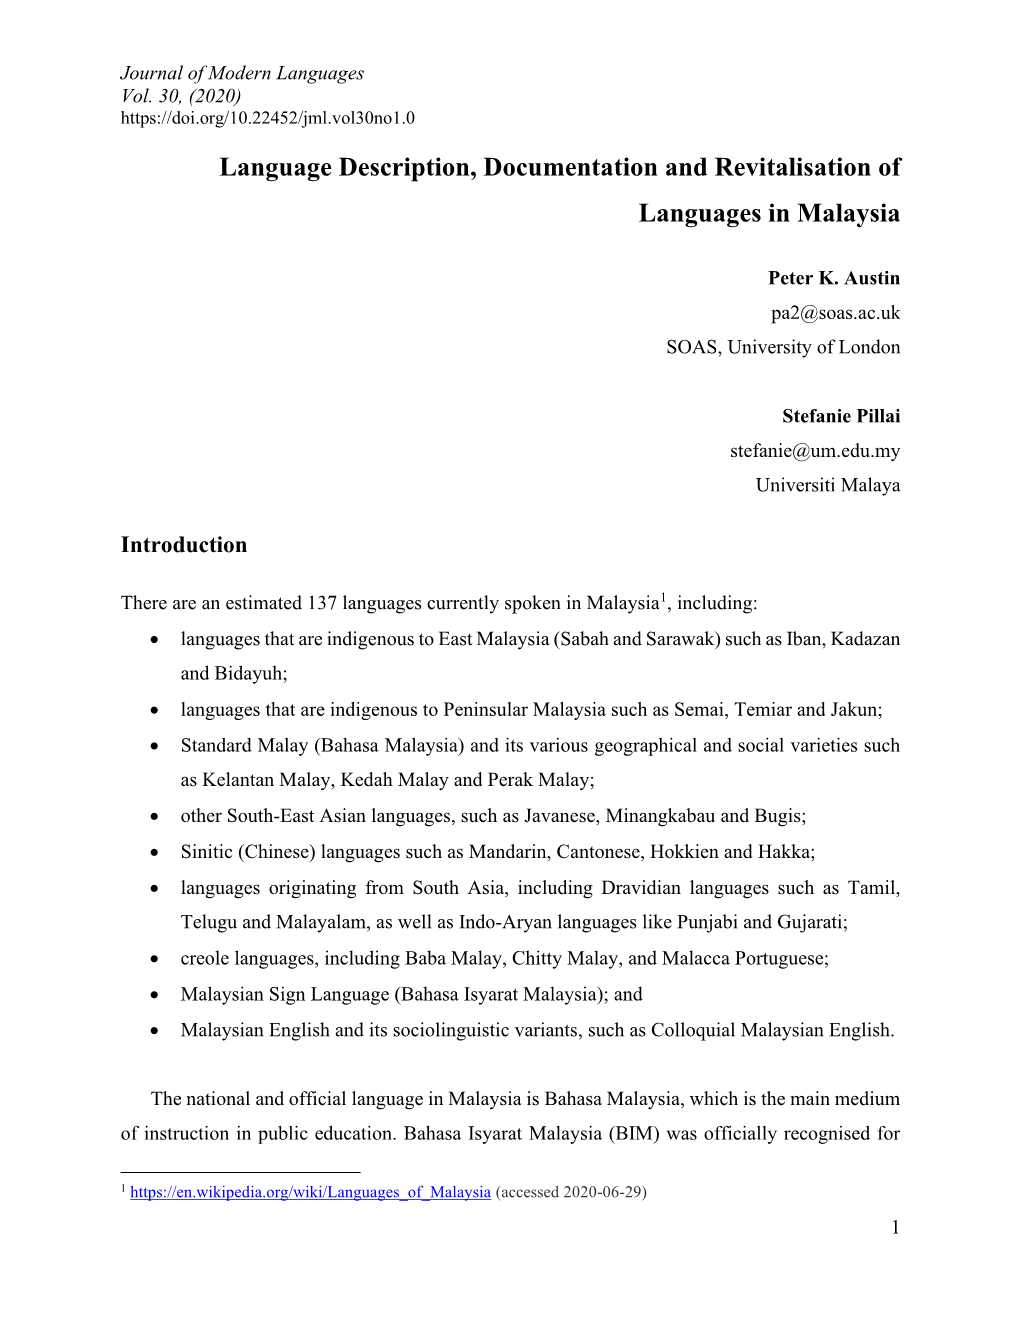 Language Description, Documentation and Revitalisation of Languages in Malaysia